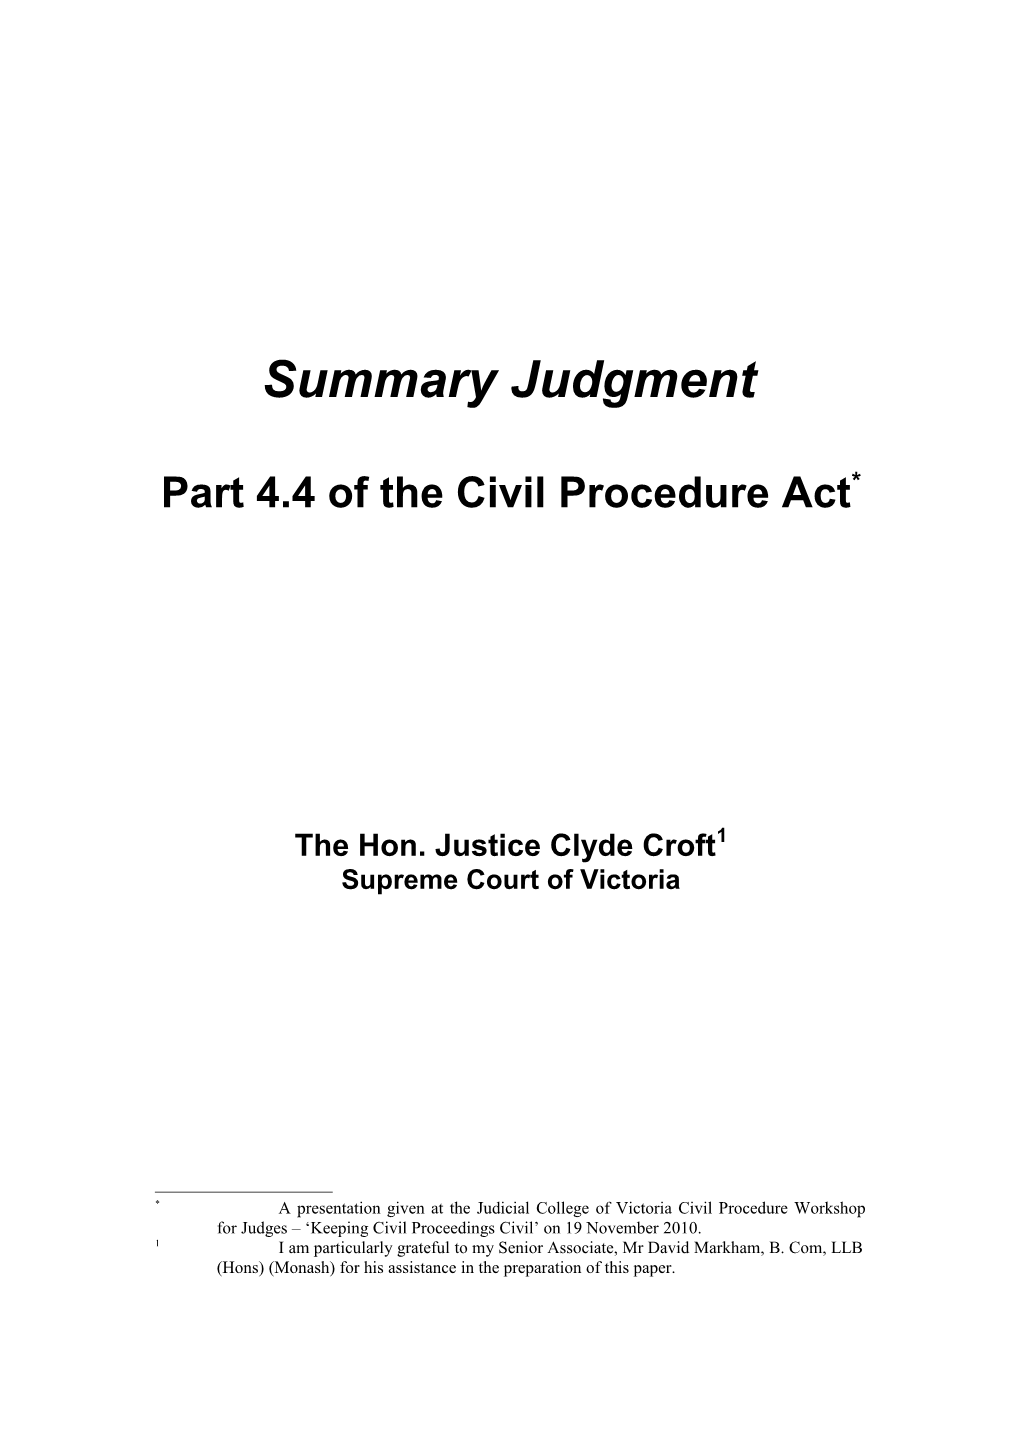 Summary Judgment Part 4.4 of the Civil Procedure Act